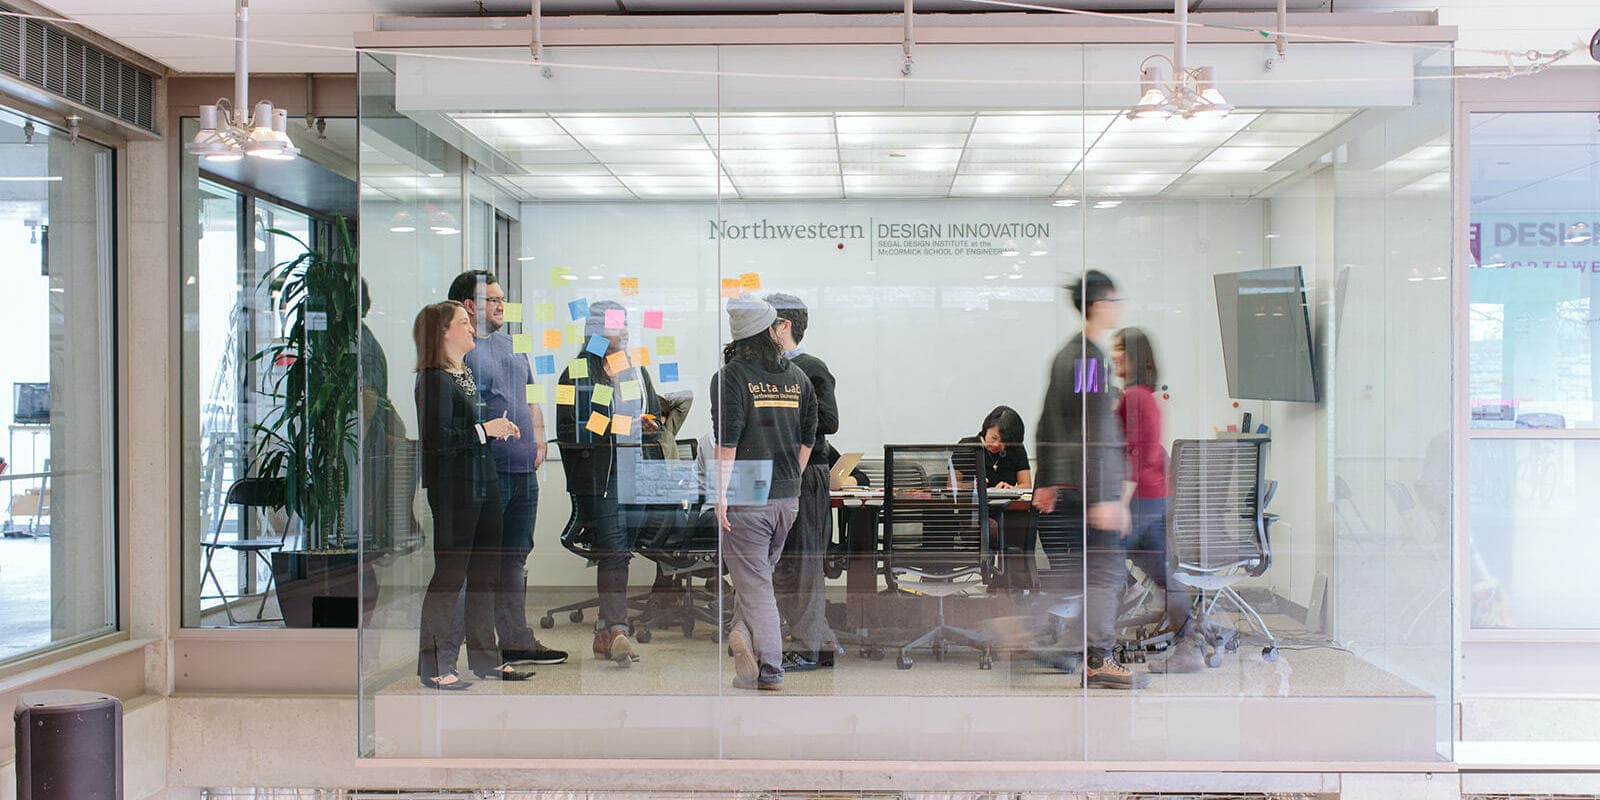 Lab members collaborating with post-it notes in a glass fishbowl-like room.